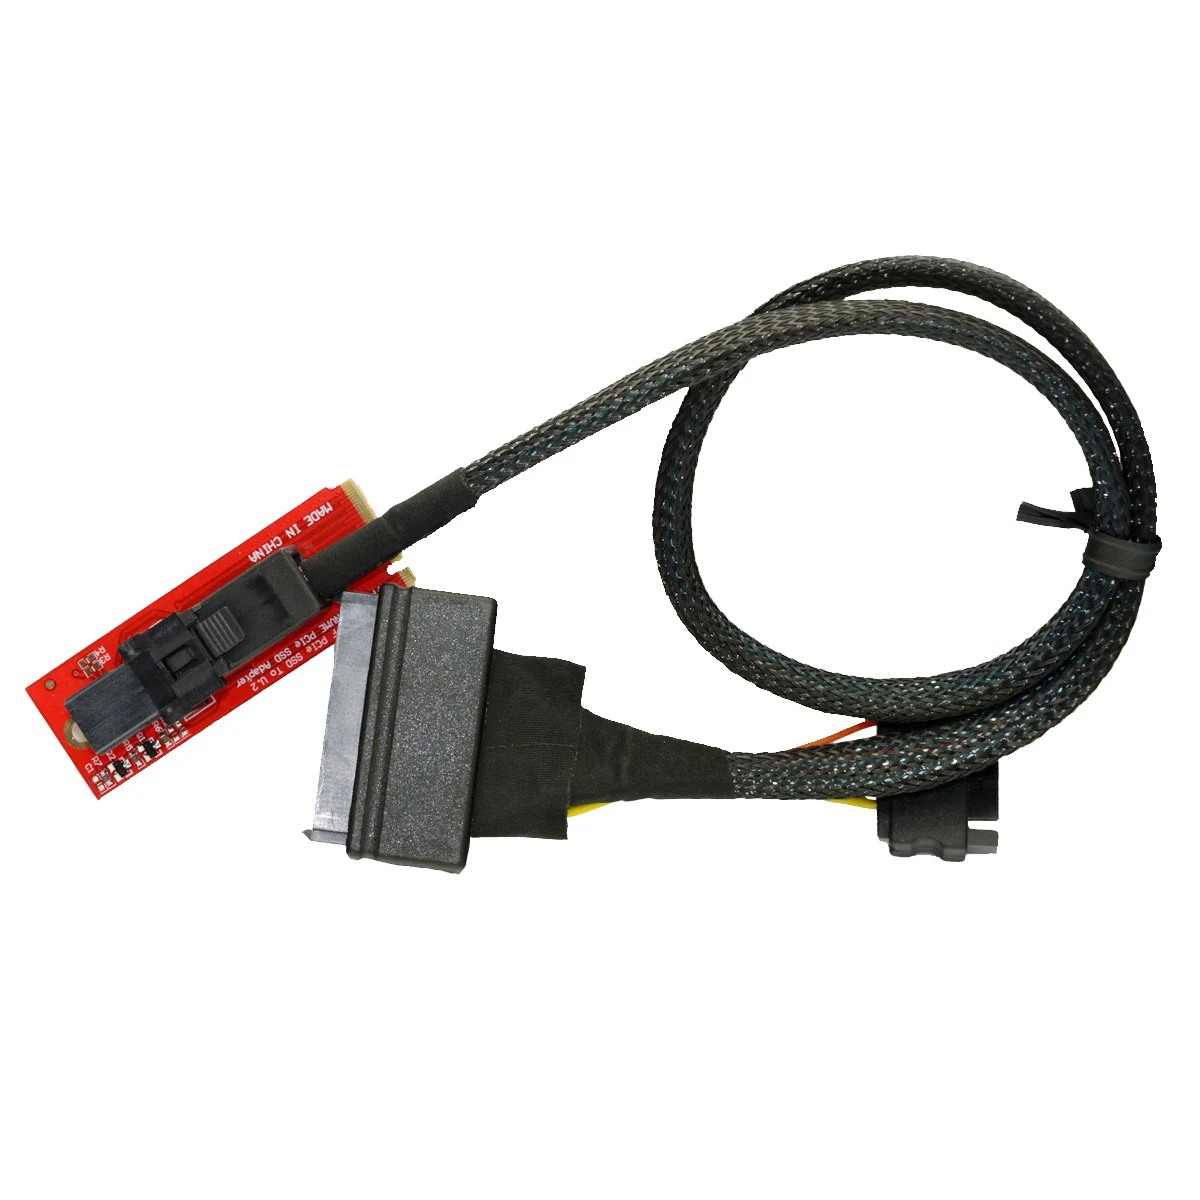 

U.2 U2 Kit SFF-8639 NVME PCIe SSD Adapter & Cable for Mainboard Intel SSD 750 p3600 p3700 M.2 SFF-8643